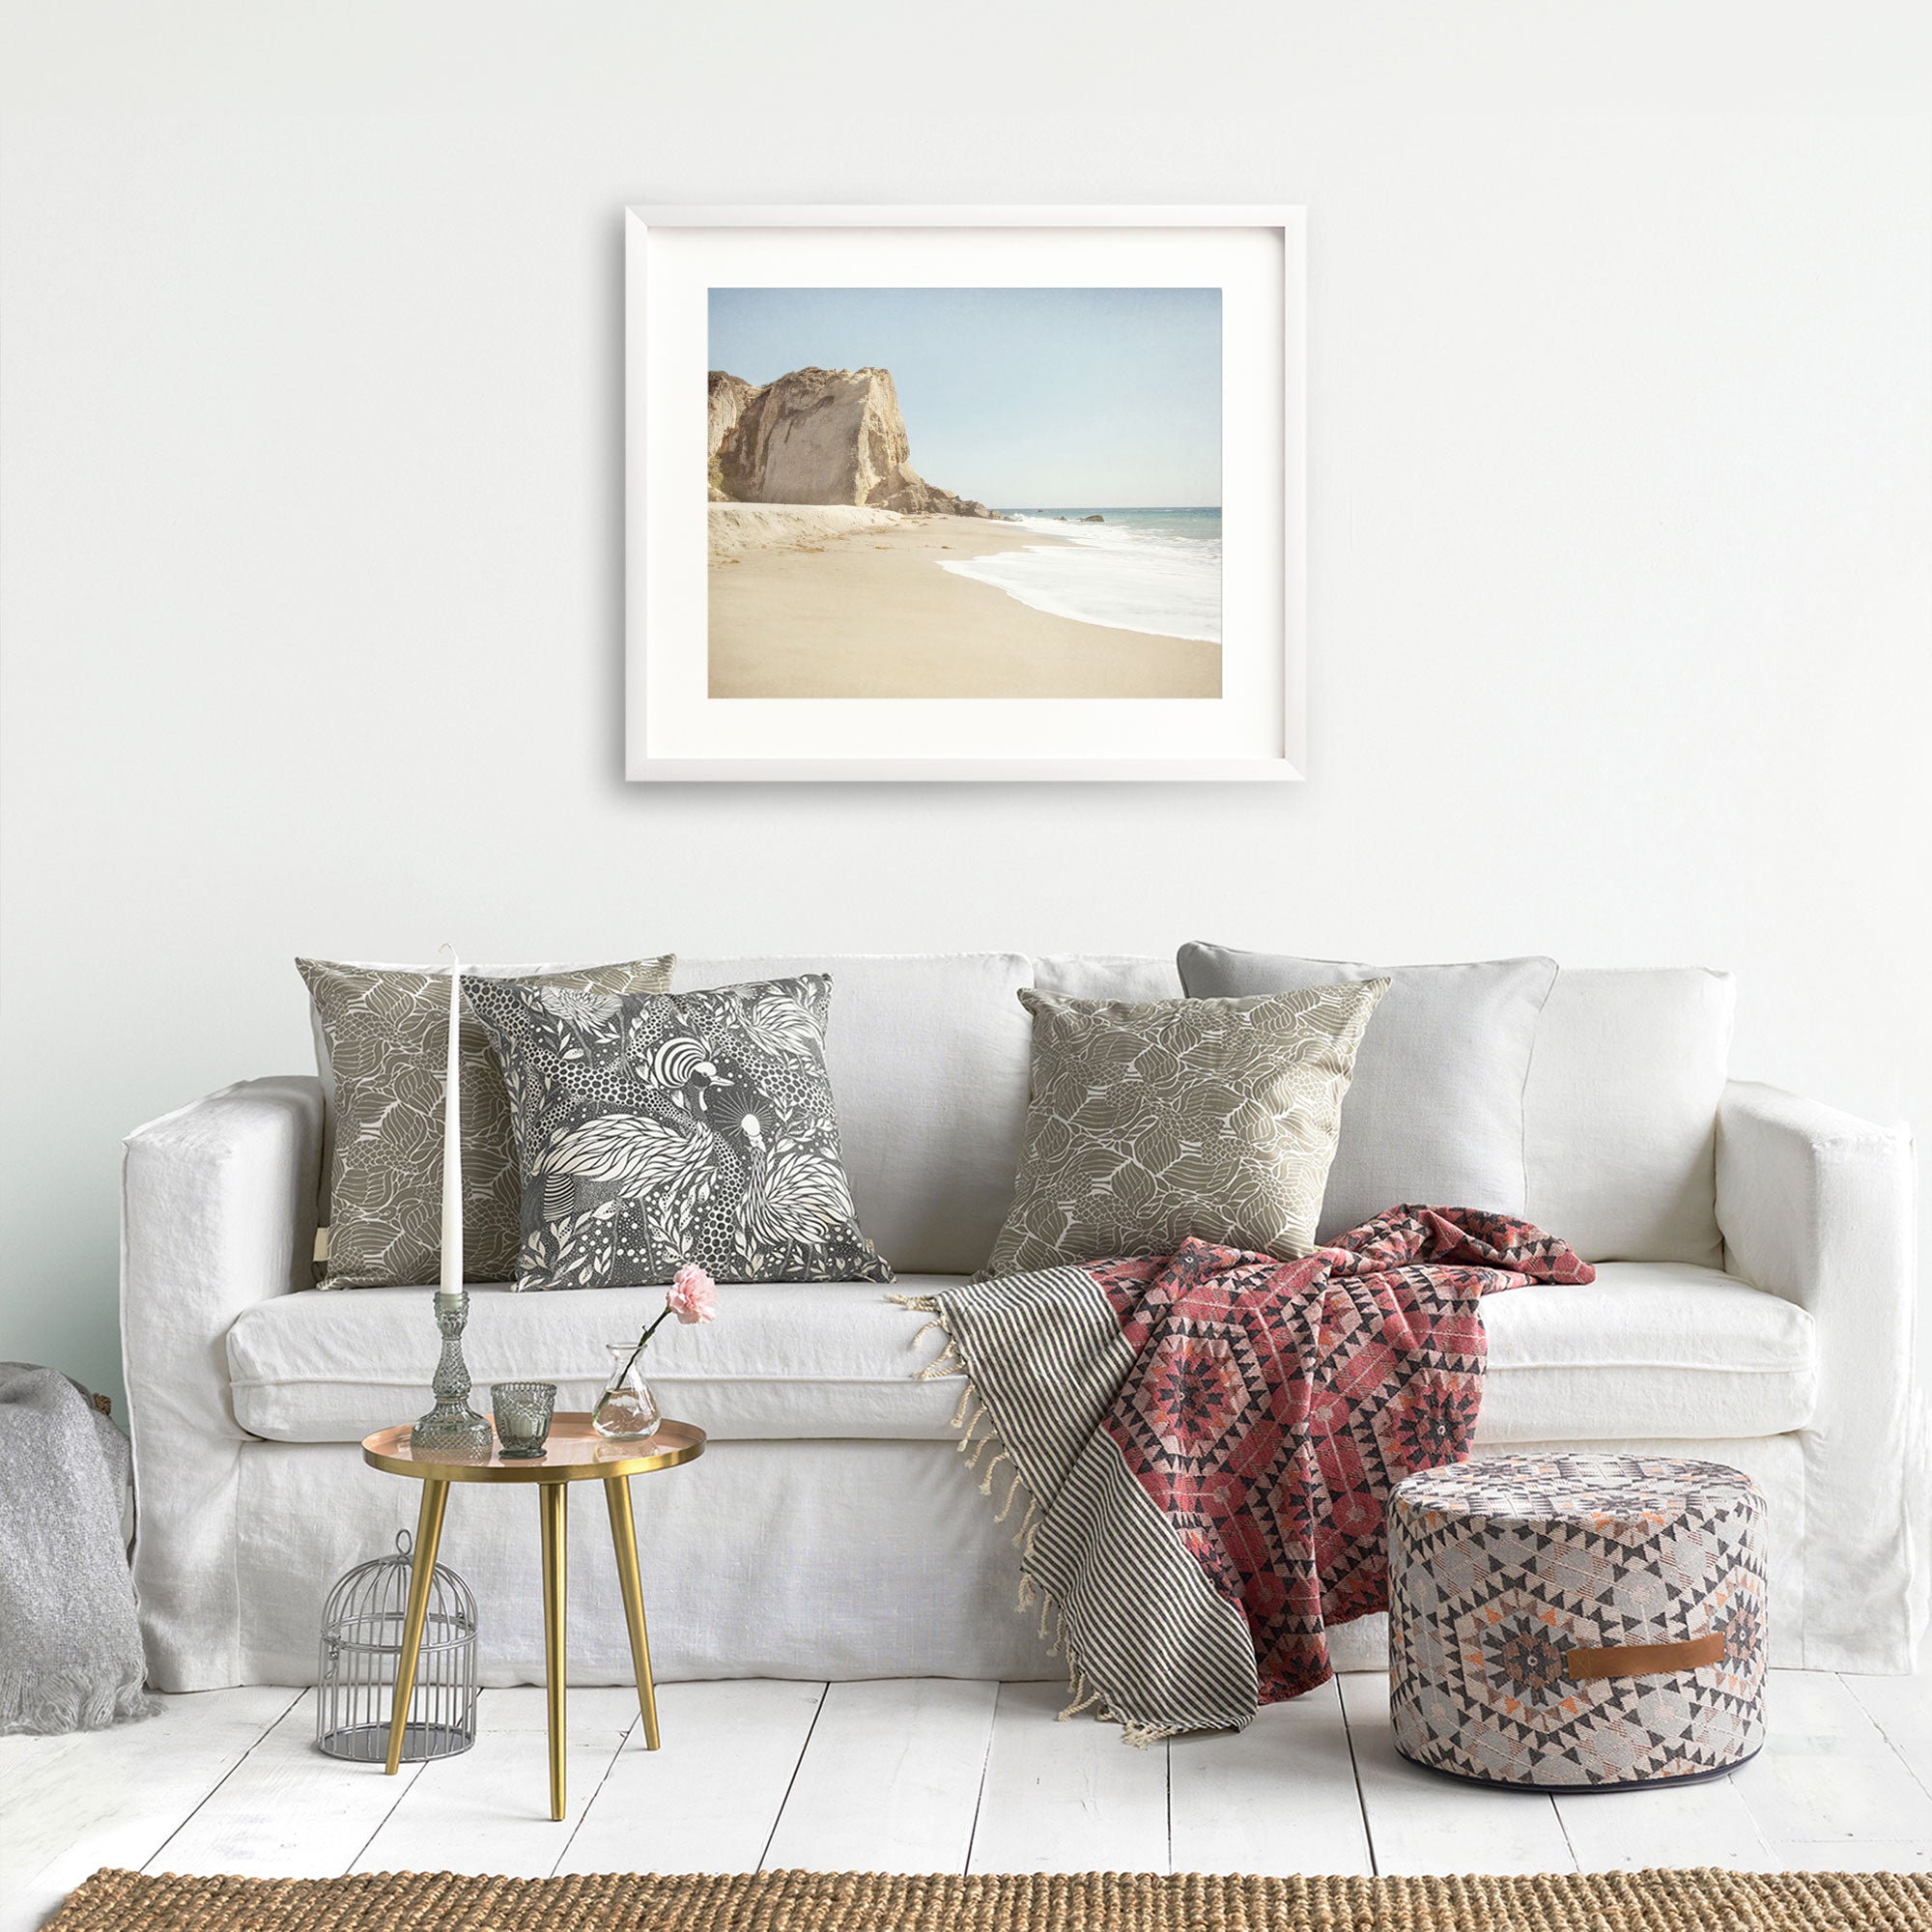 A cozy living room with a white couch adorned with decorative pillows, a framed Offley Green California Malibu Print, &#39;Point Dume&#39; landscape on the wall, a small table with a vase next to the sofa, a blanket, and a pattern.